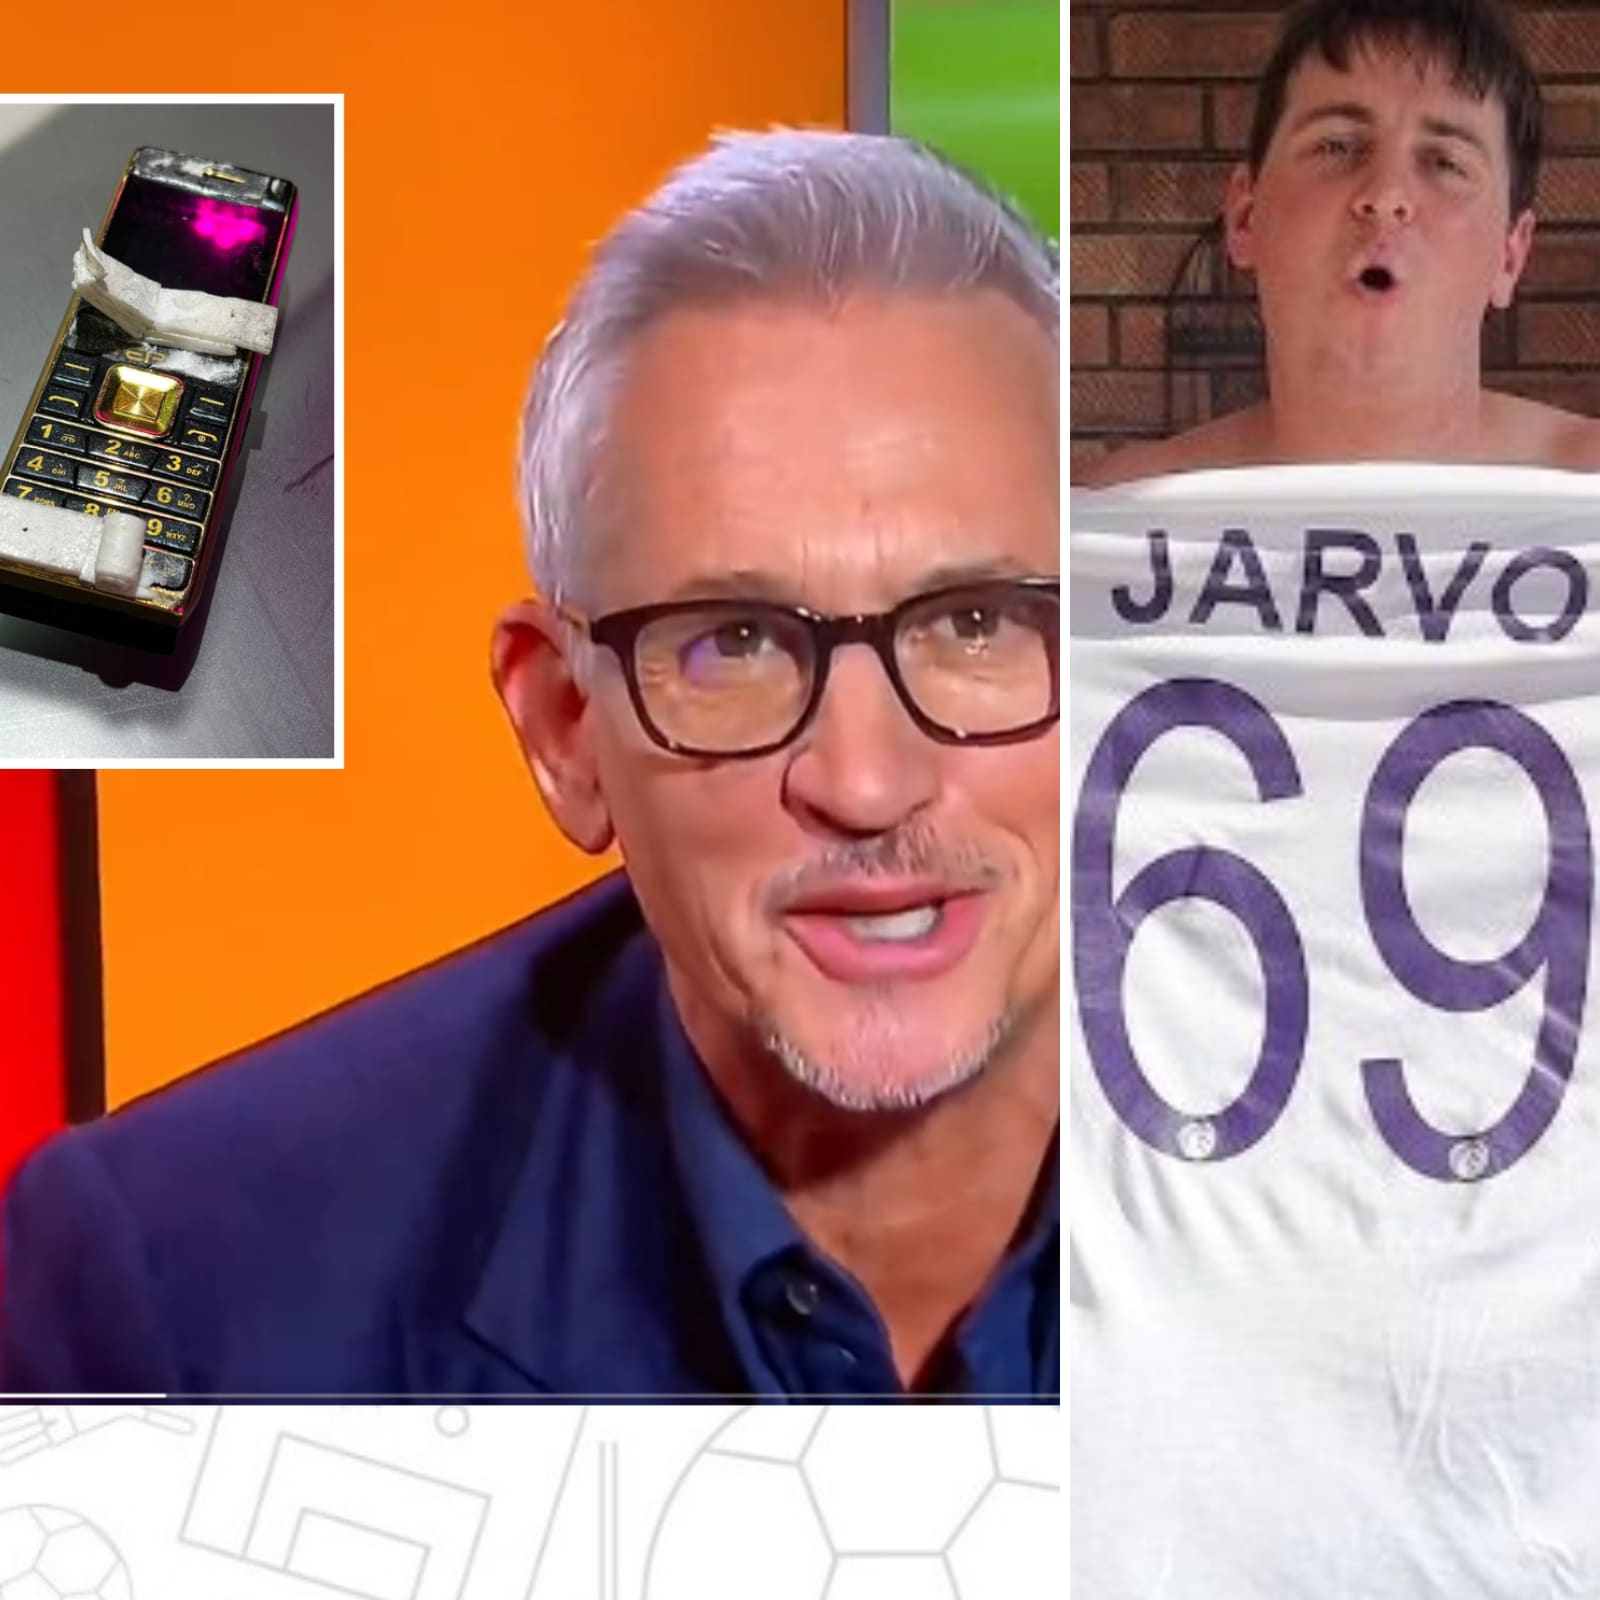 Anshka Sexxxx - Remember Jarvo69? Youtuber Claims Responsibility for Sex Noises During  Football Broadcast; BBC Apologises for Porn Audio - News18